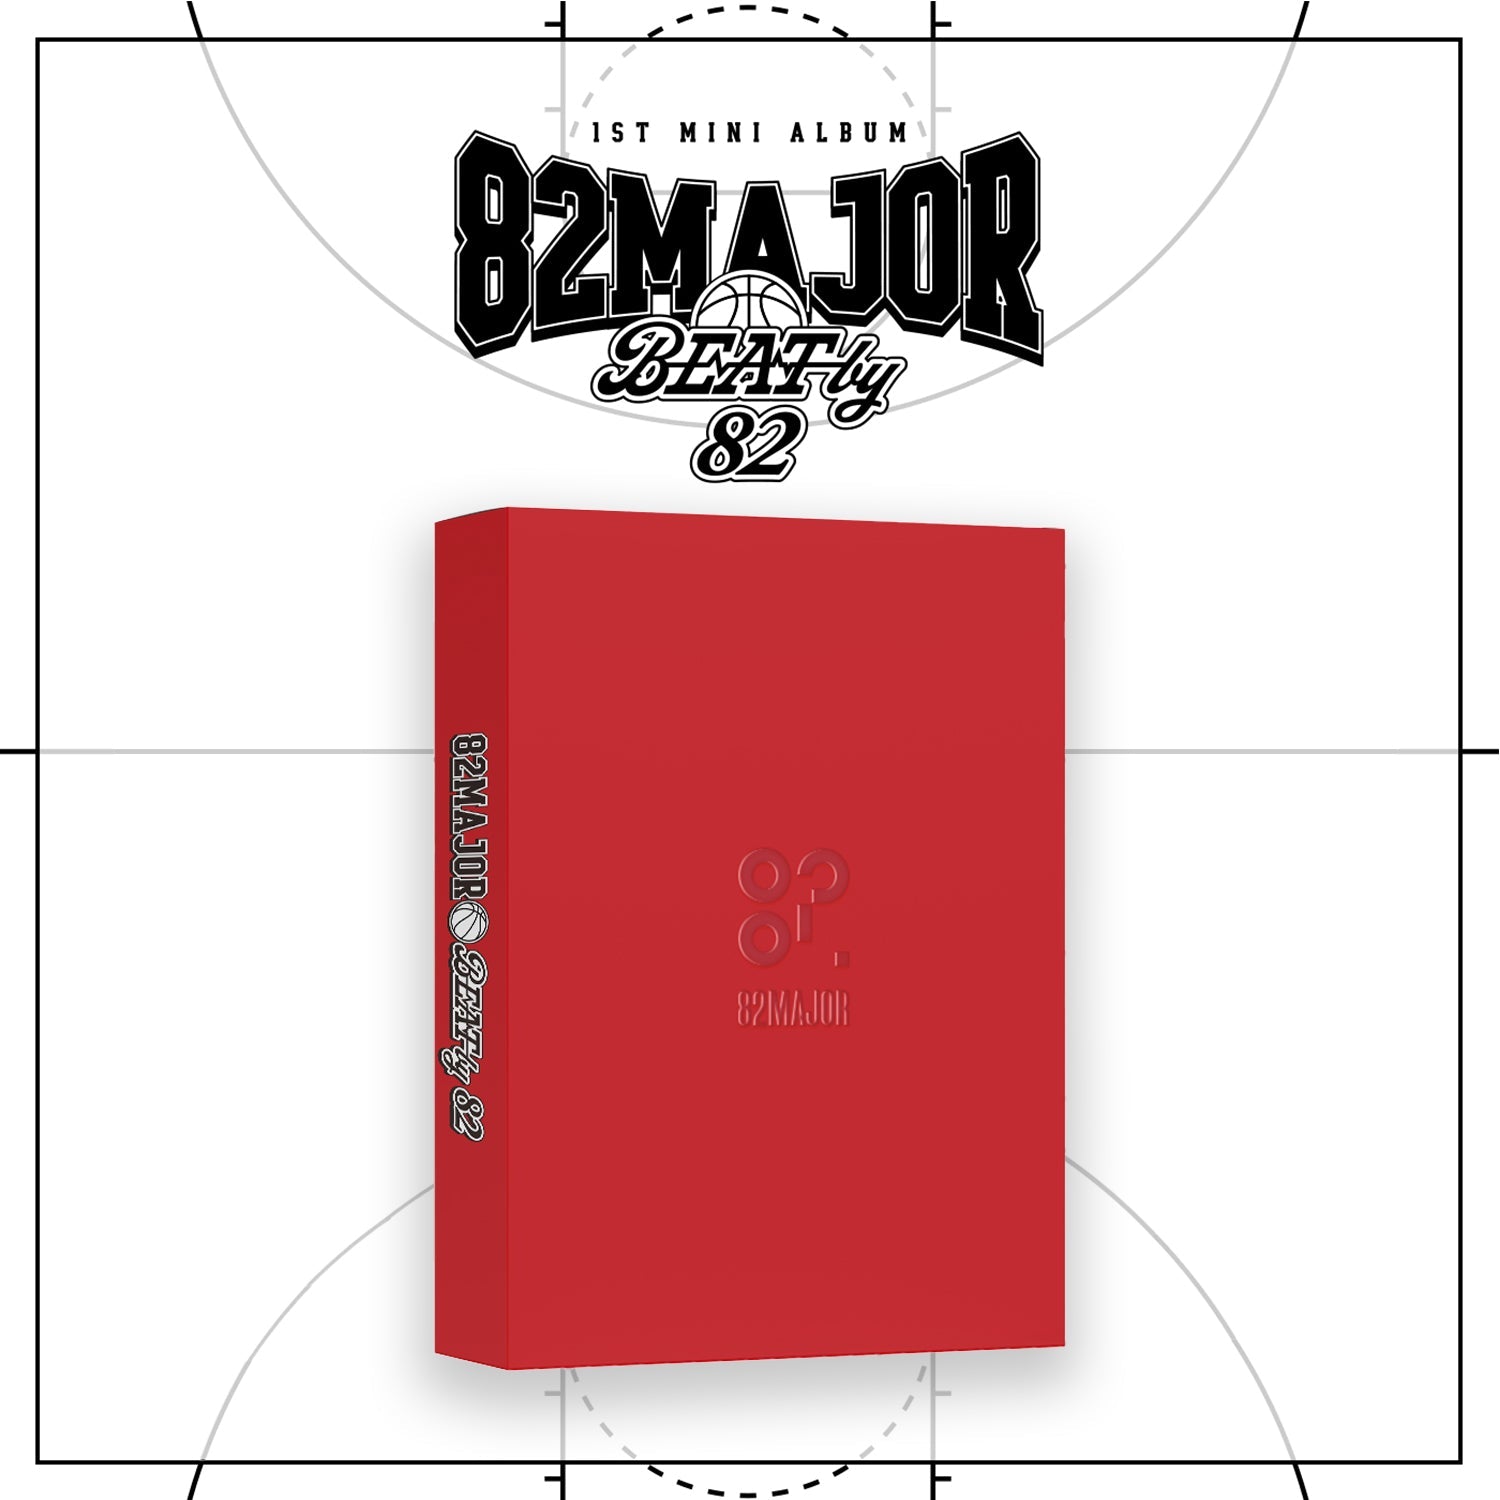 82MAJOR 1ST MINI ALBUM 'BEAT BY 82' BE VERSION COVER